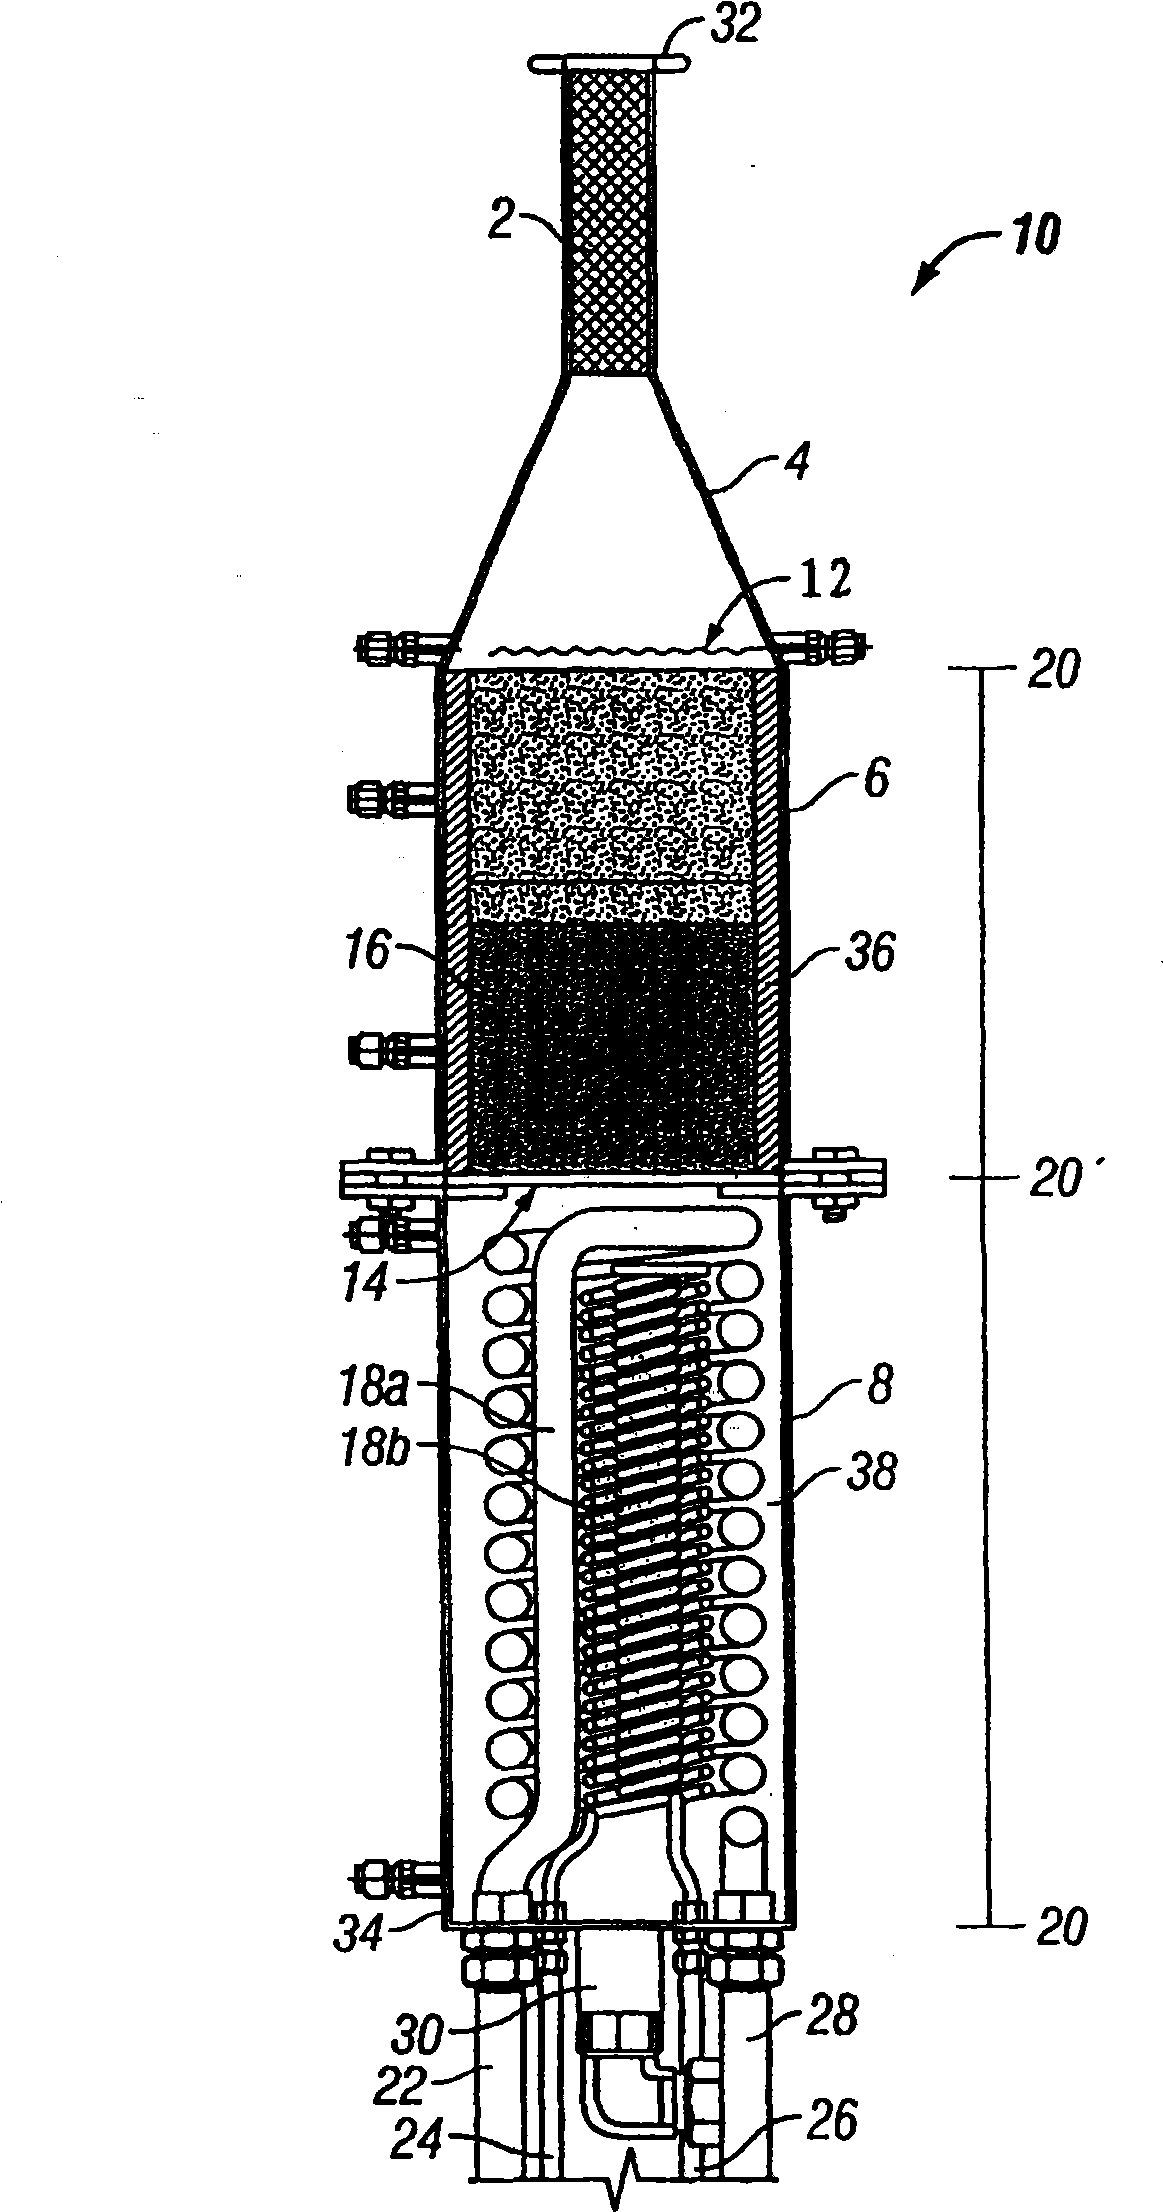 Method and apparatus for rapid heating of fuel reforming reactants